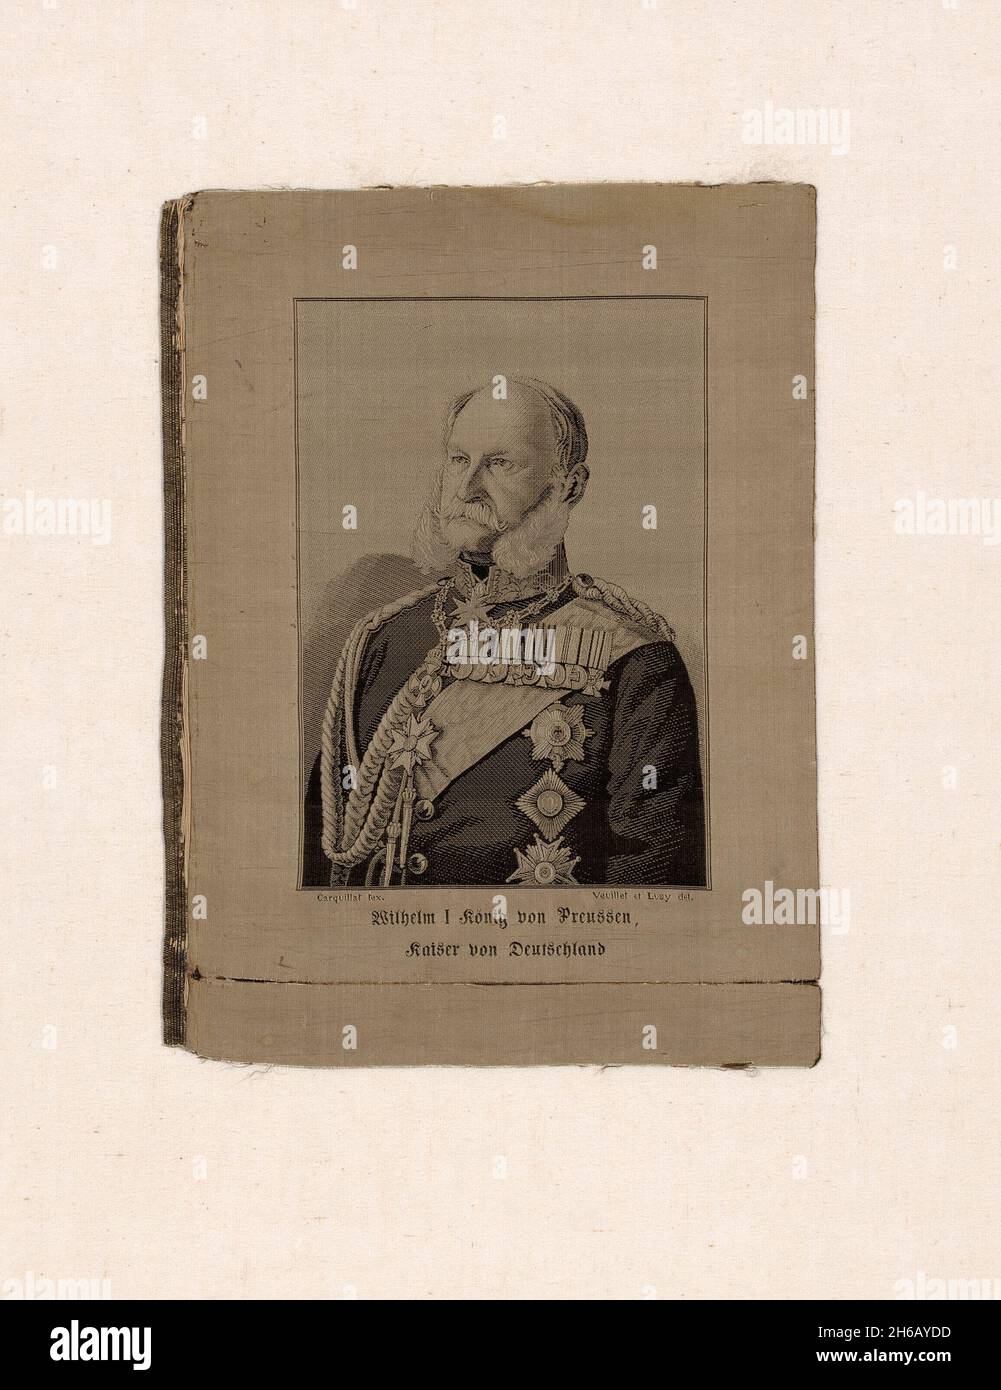 Portrait of Wilhelm I, King of Prussia, Emperor of Germany (1797-1888), Lyon, 19th century. Stock Photo